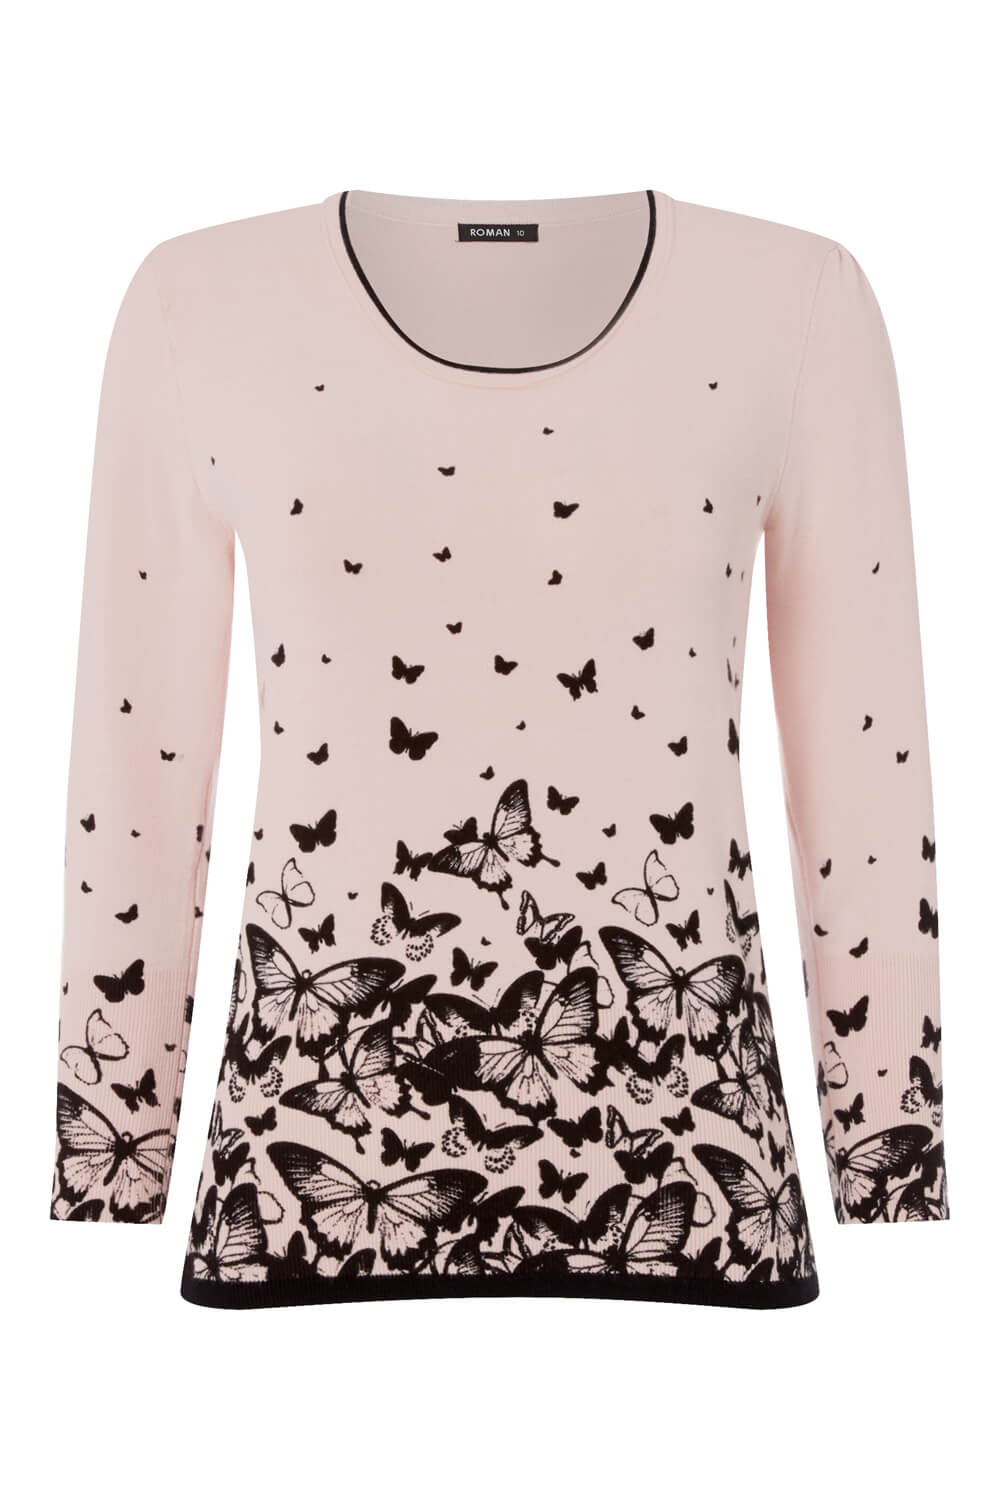 Light Pink Butterfly Print Jumper, Image 5 of 5